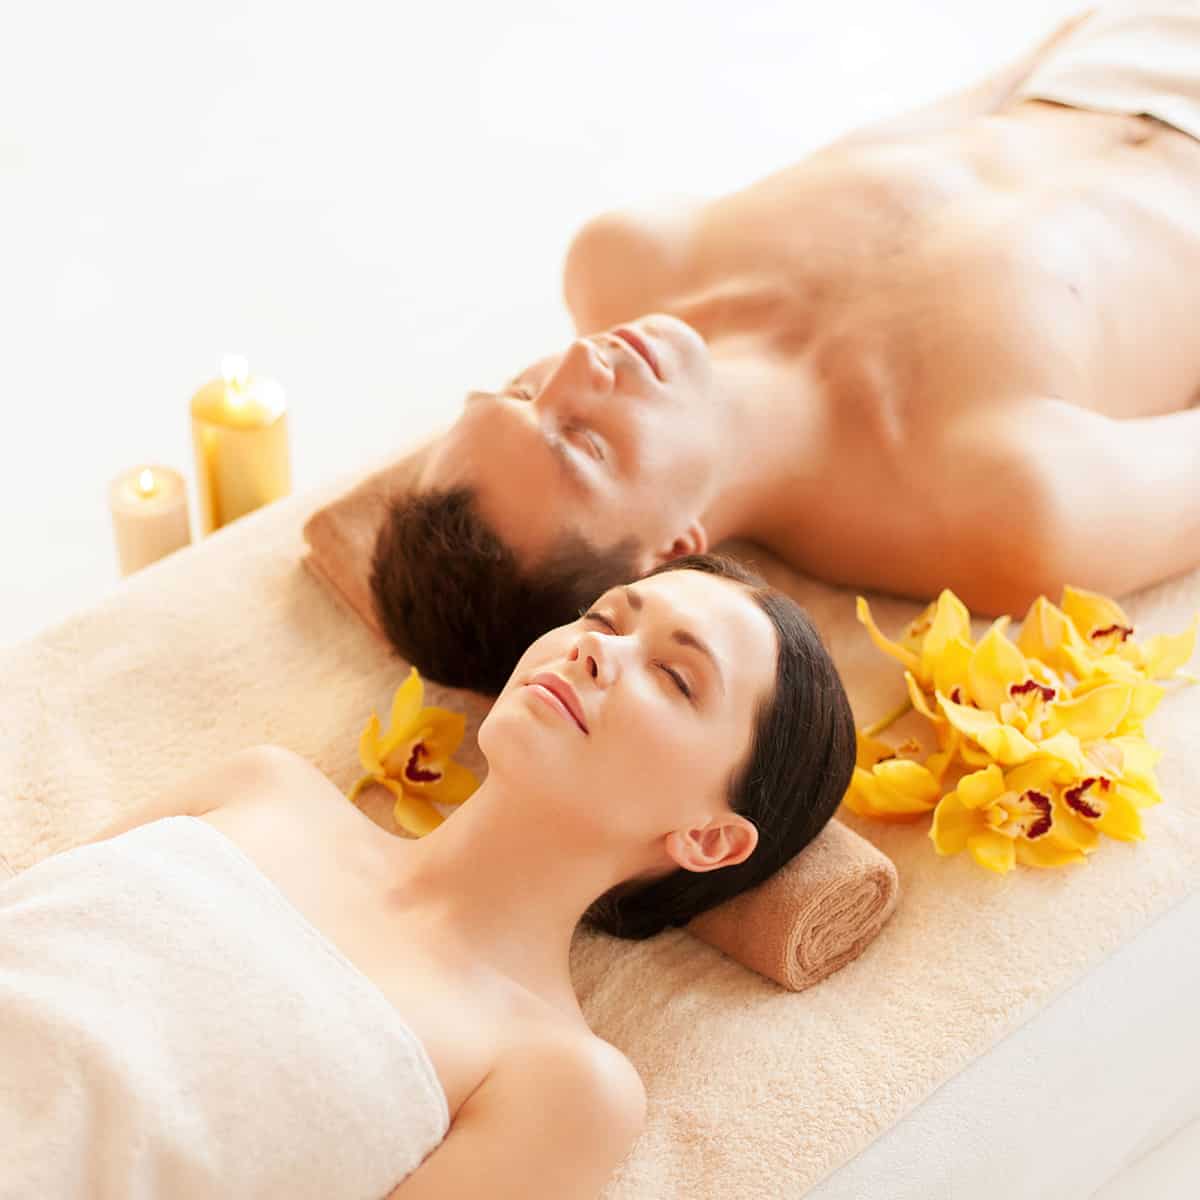 Couple relaxing in the spa